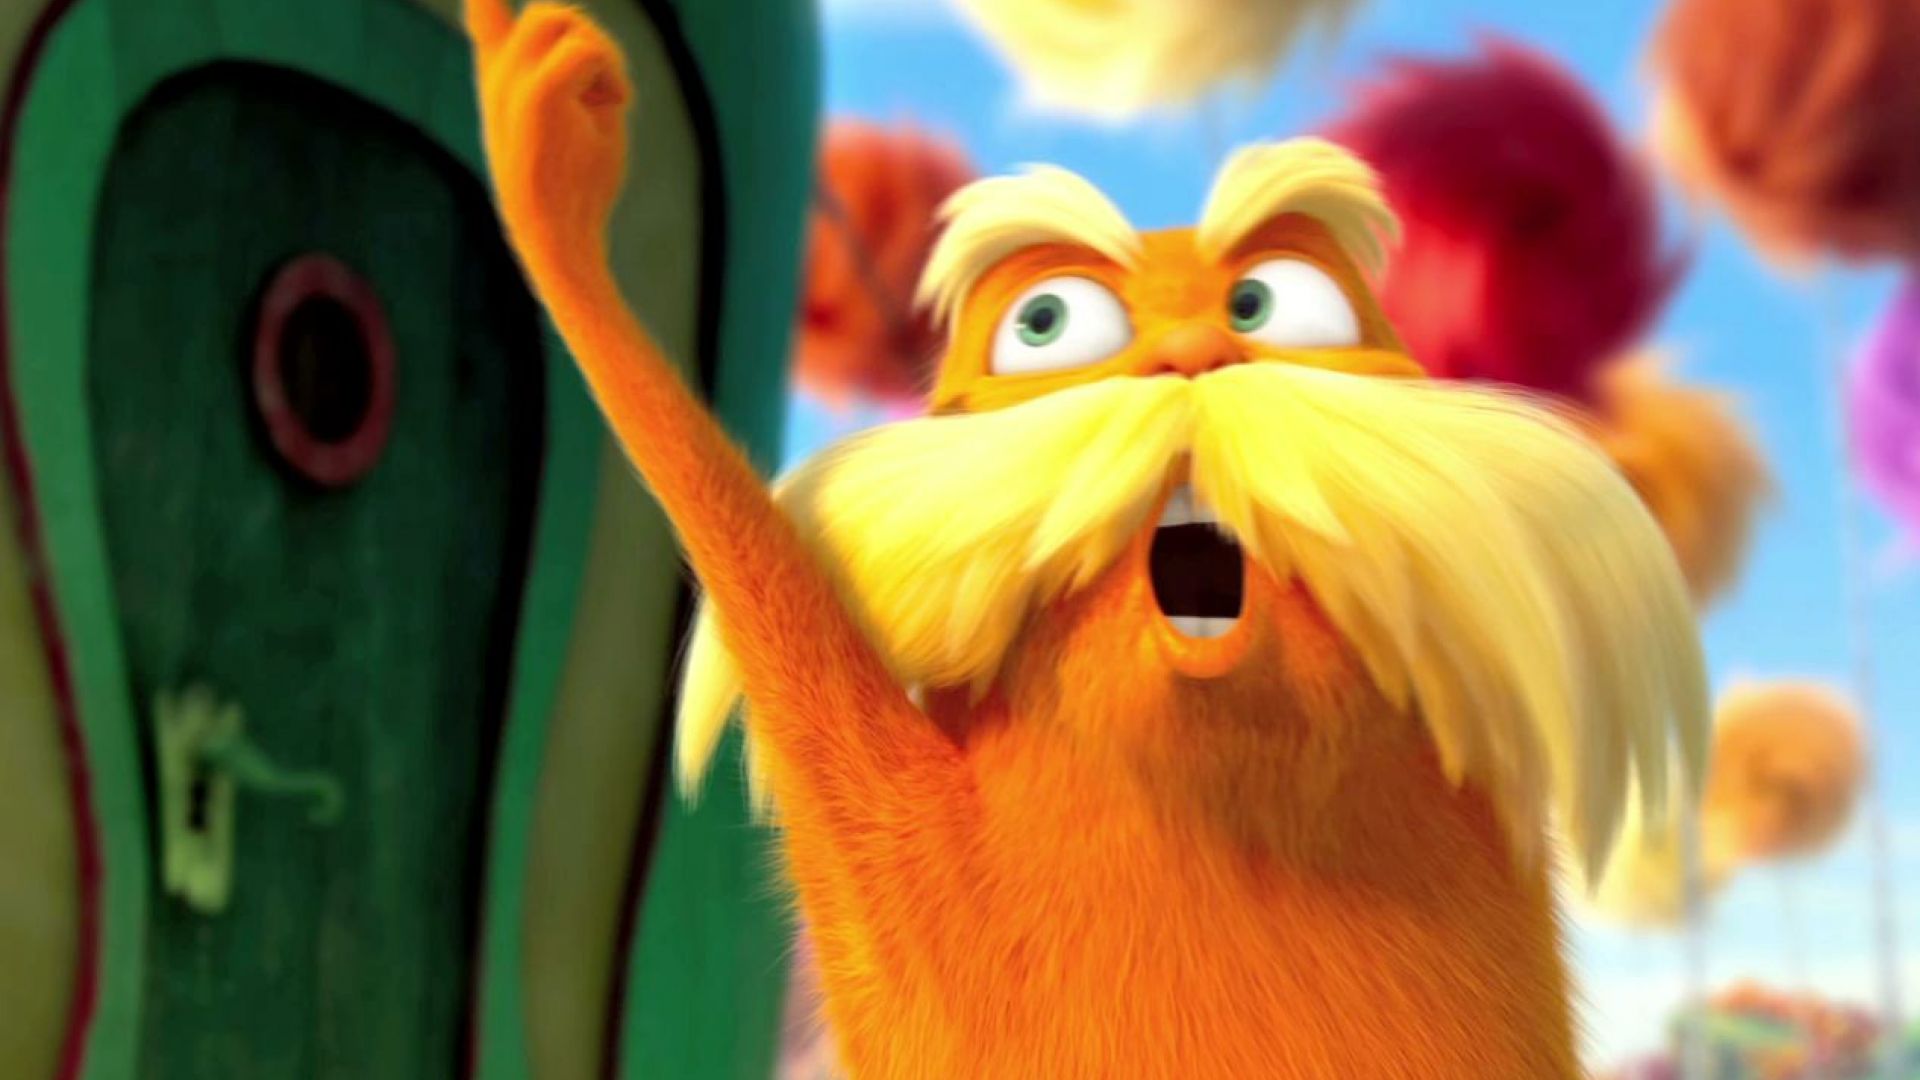 The Lorax featuring Polyphonic Spree - Light and Day, Reach for the Sun